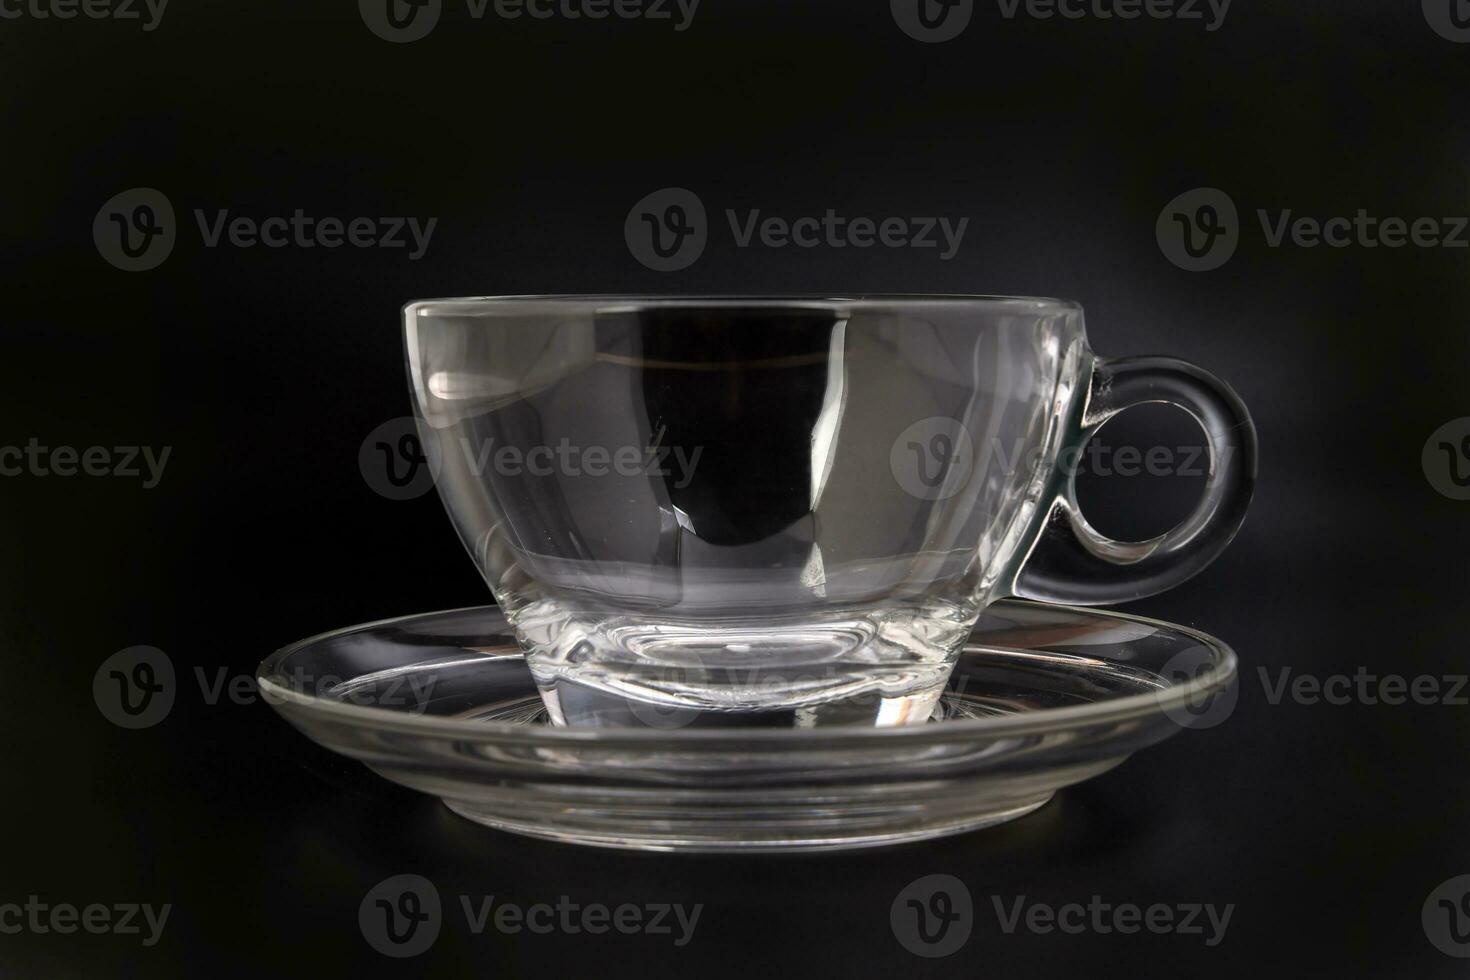 Empty transparent glass see through coffee tea cup saucer on black background photo